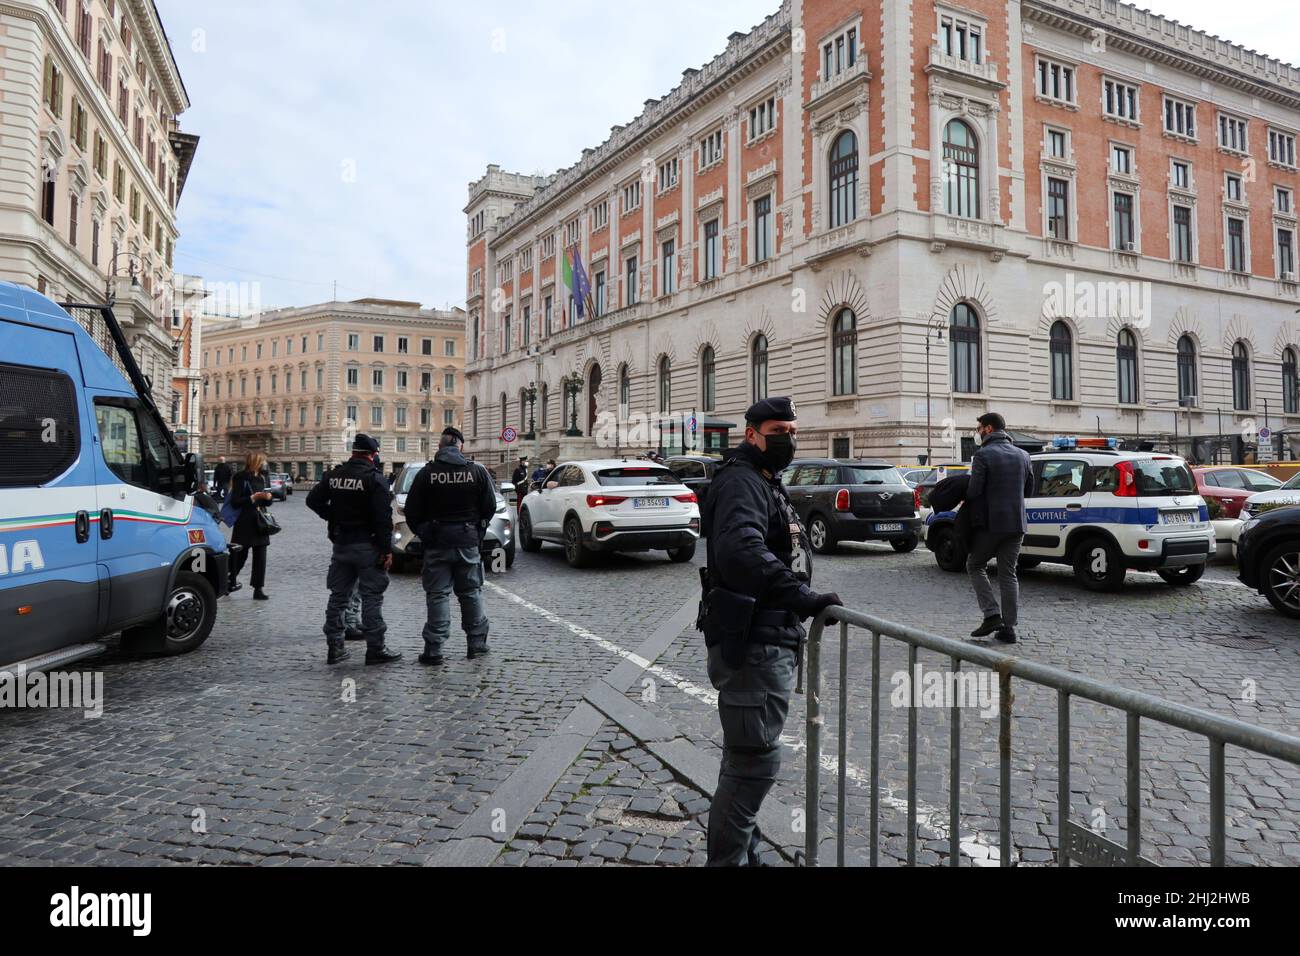 Rome, Italy. 26th Jan, 2022. Police Forces patrol Palazzo Chigi, the residence of the Prime Minister of the Italian Republic, in Rome, Italy, on January 26, 2022, as Members of the Italian Parliament vote to elect the new President of Italian Republic. The favorite candidates are the Prime Minister Mario Draghi and the incumbent President Sergio Mattarella. (Photo by Elisa Gestri/Sipa USA) Credit: Sipa USA/Alamy Live News Stock Photo